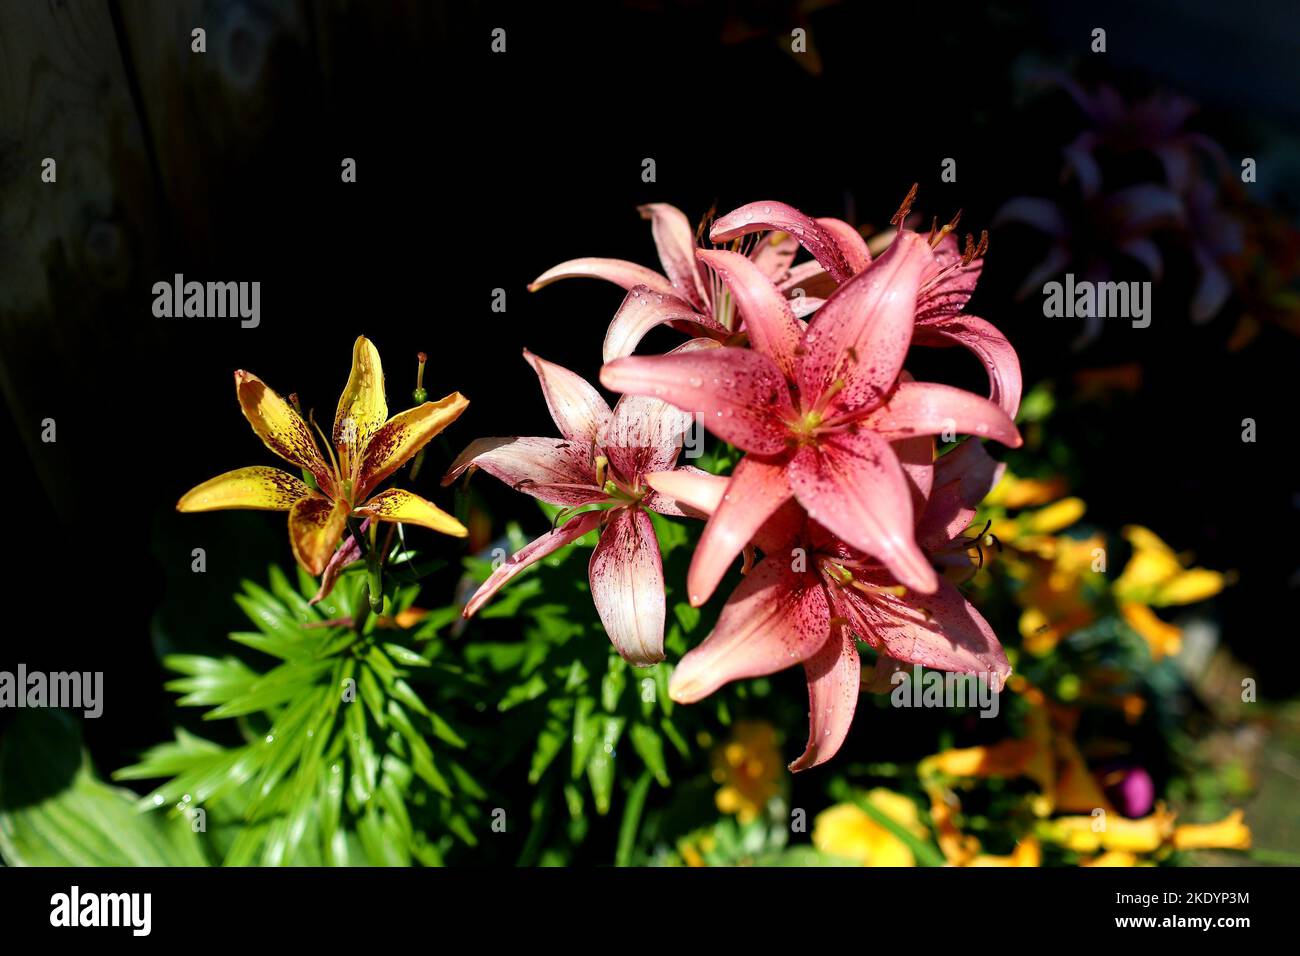 A bunch of delicate potted lilies (Lilium) with sunlight falling on them on the dark background Stock Photo